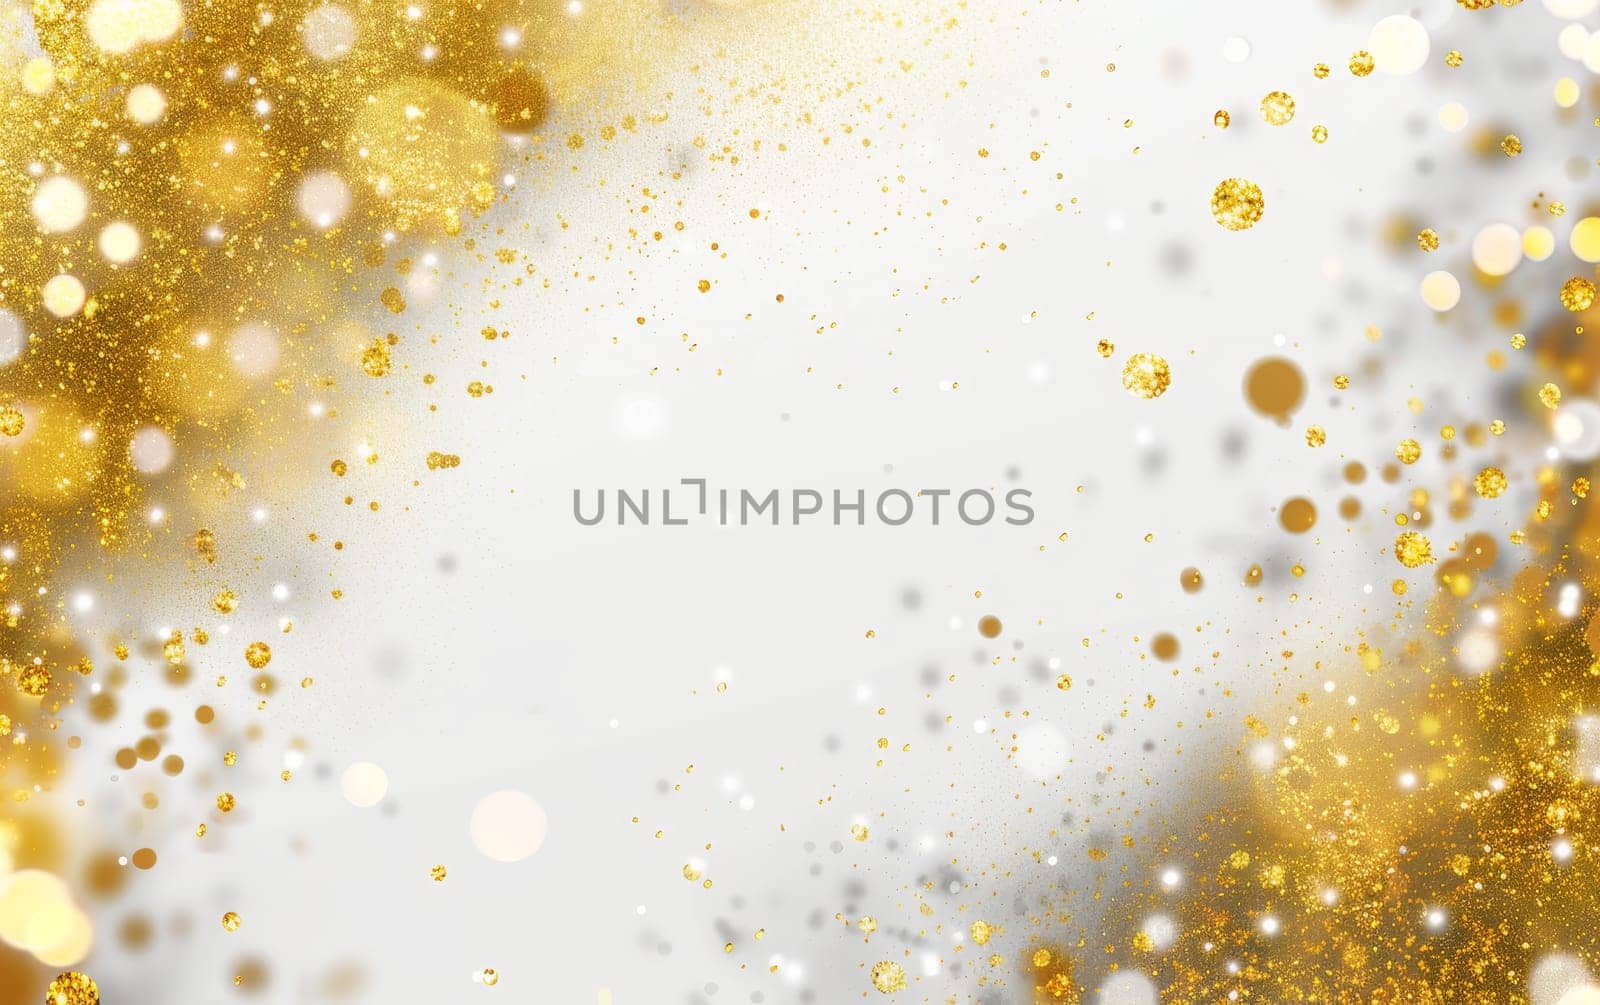 Glistening gold particles fall like snowflakes in this enchanting winter background. The image captures the essence of a luxurious holiday season. by sfinks